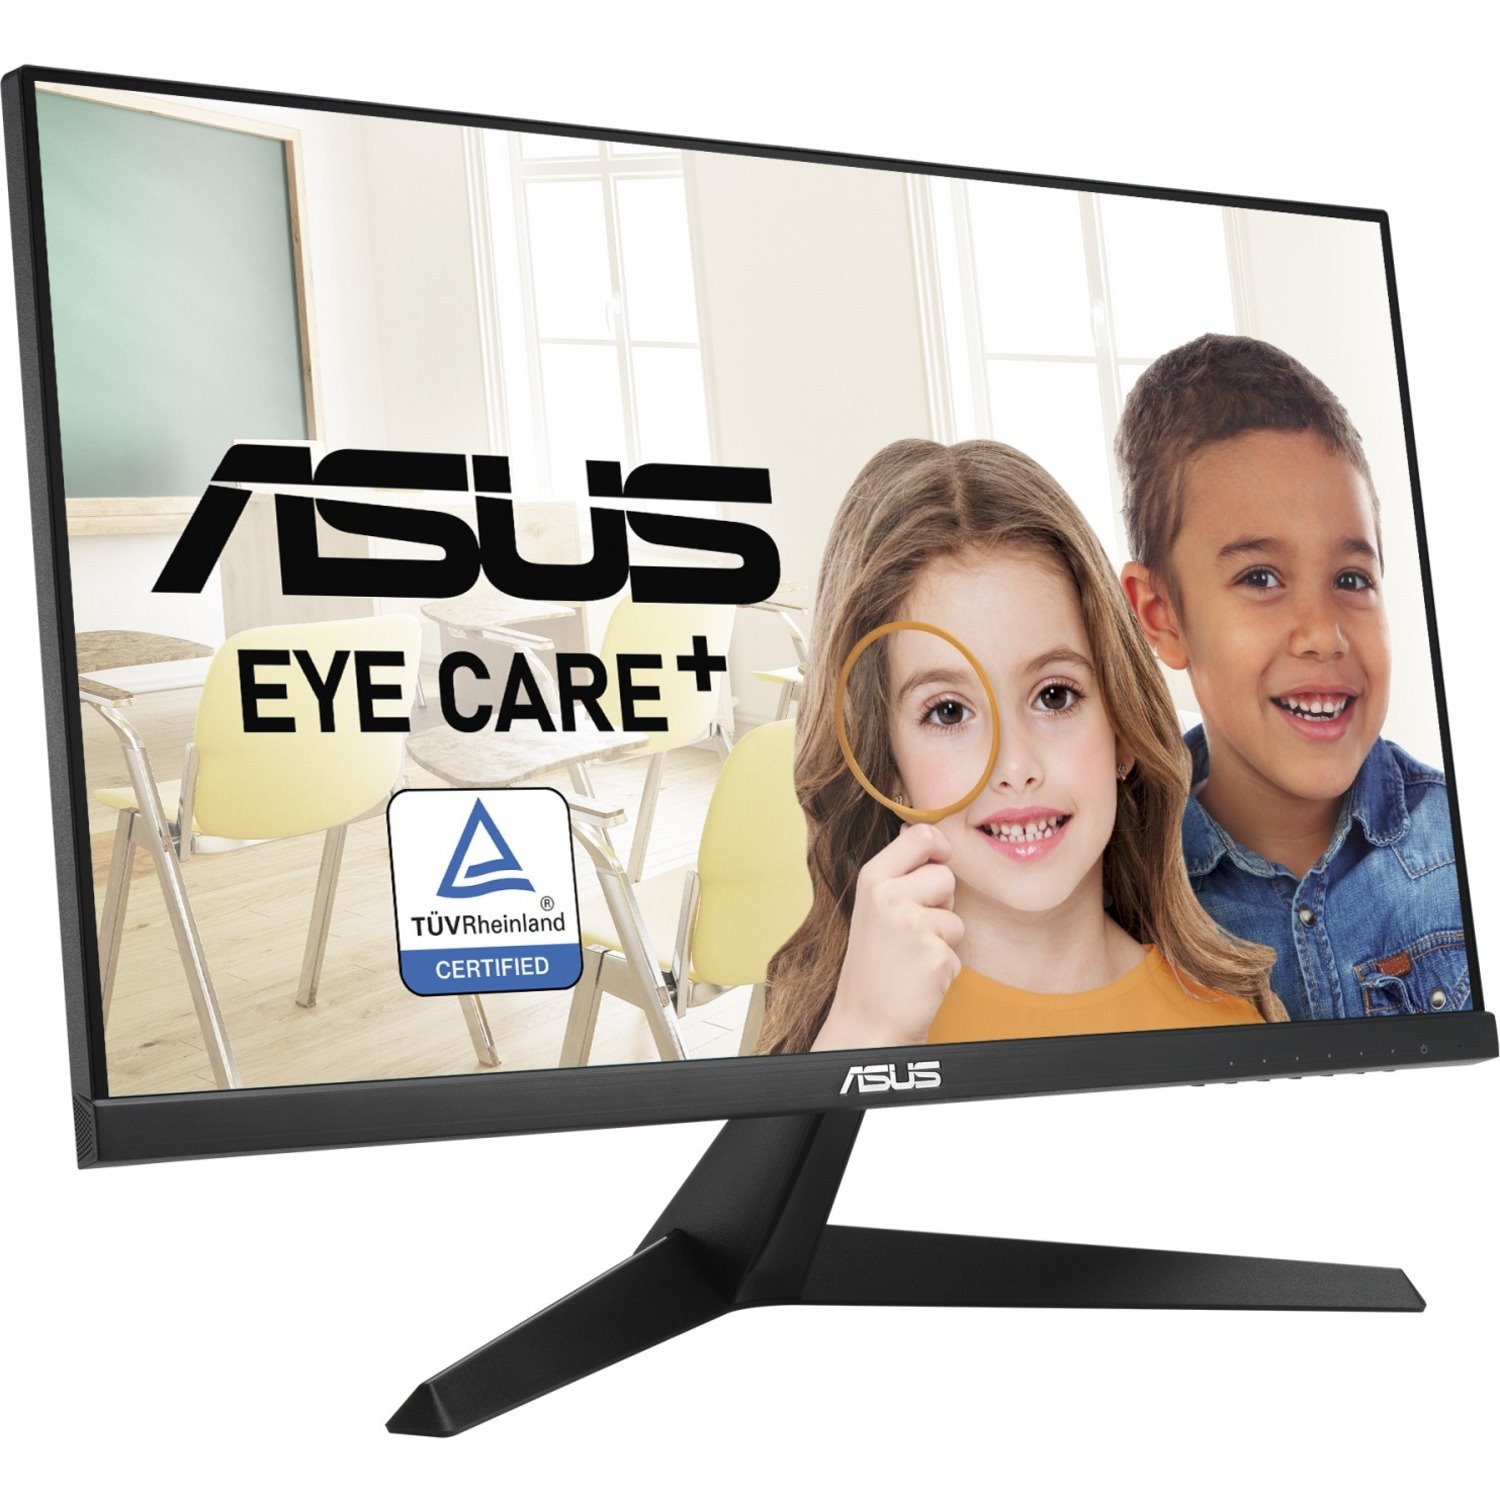 Asus VY249HE 60.5 cm (23.8") Full HD LED LCD Monitor - 16:9 - Black